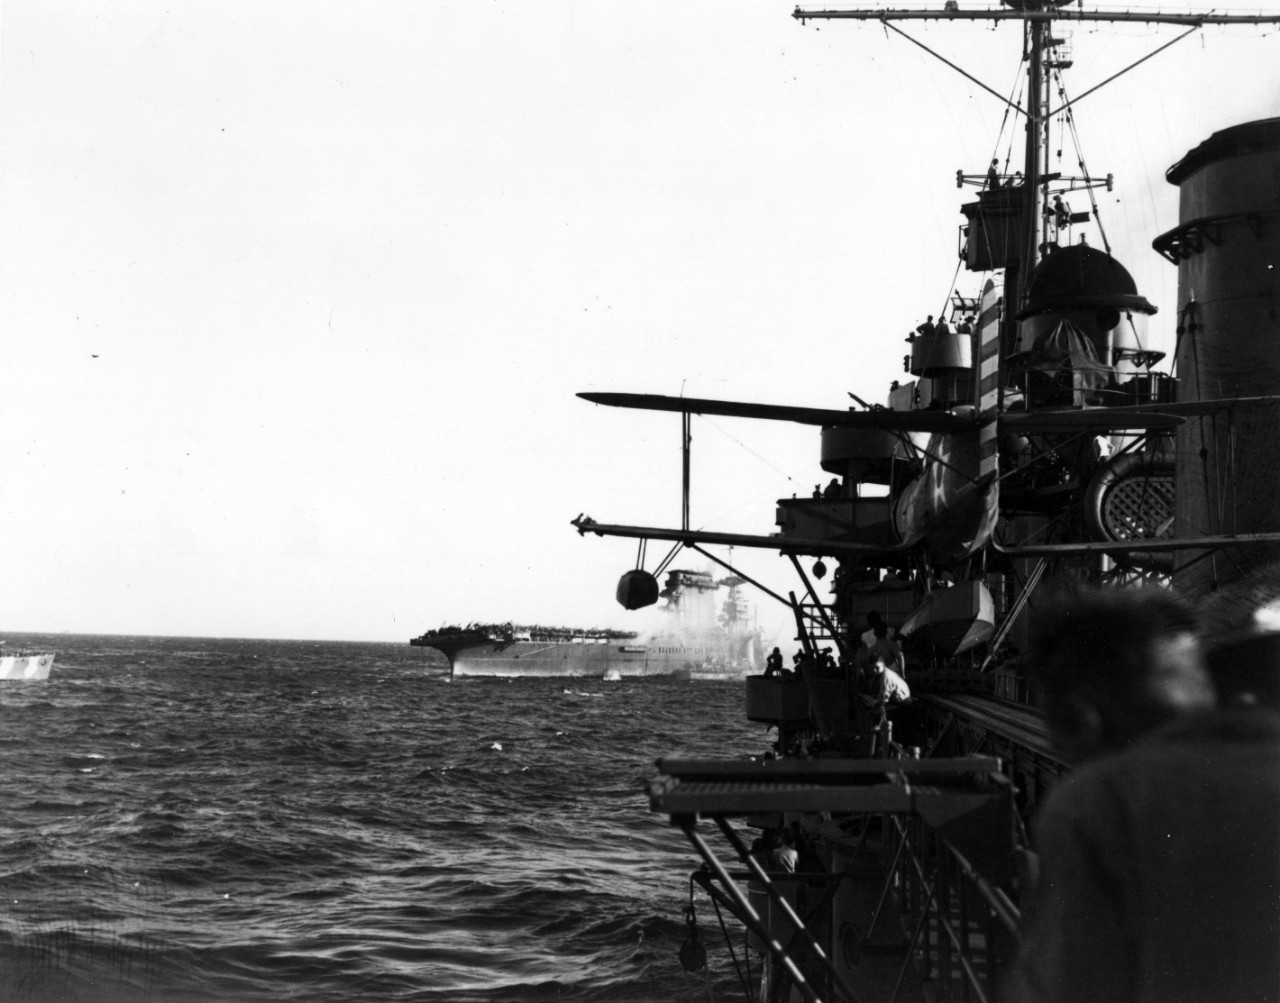 Photo #: 80-G-7407  Battle of the Coral Sea, May 1942